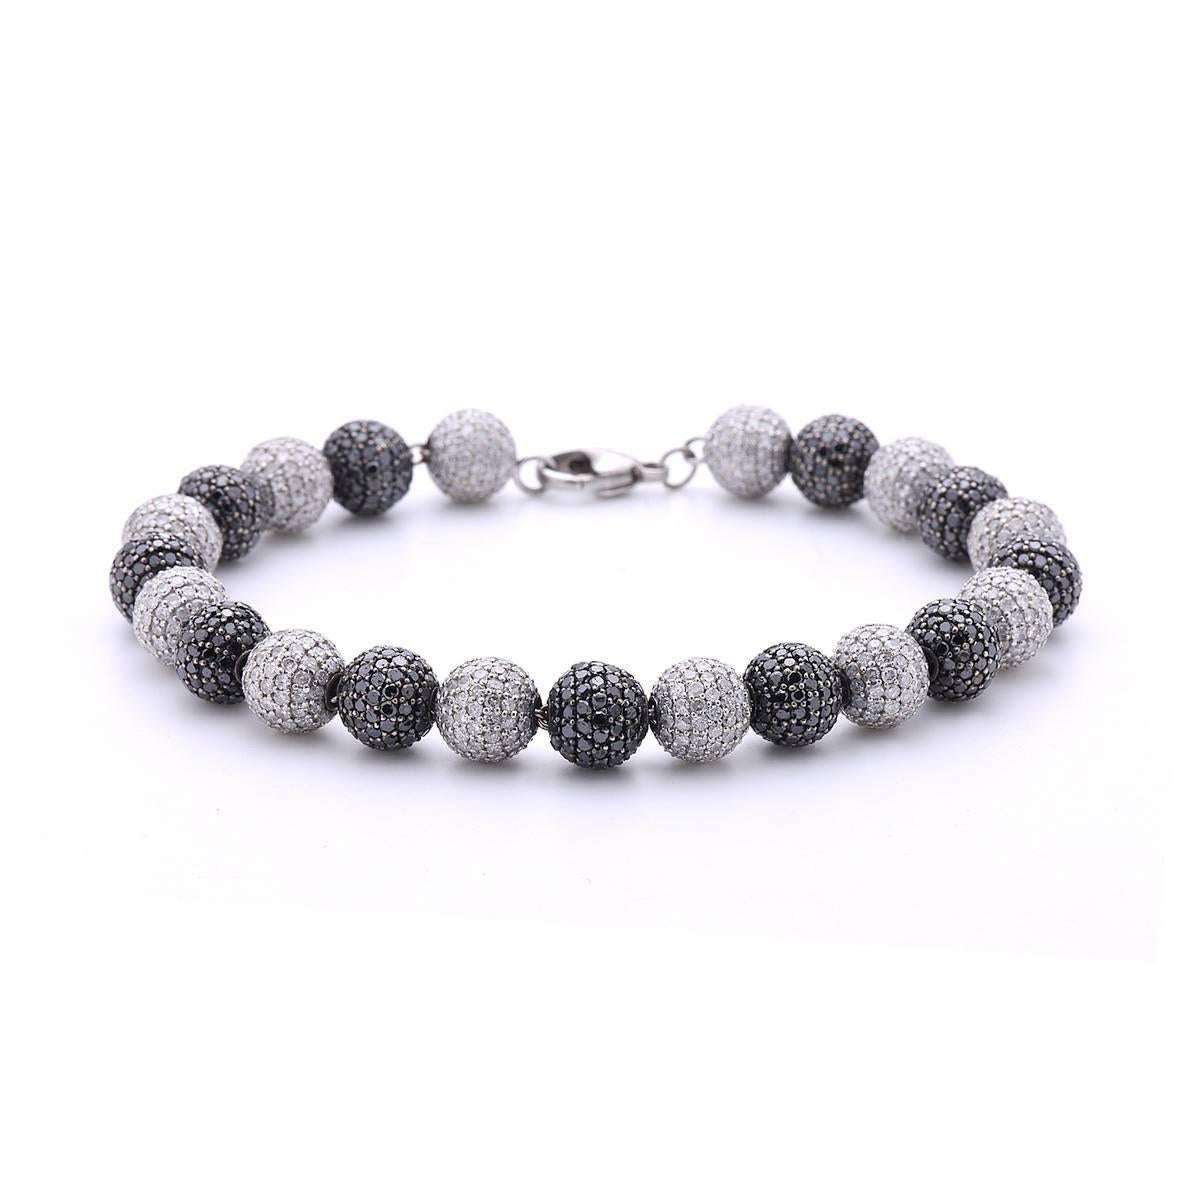 Black & White Diamond Gold Ball Bracelet is an excellent piece to match any of your black outfit. It is 7.5 inch long but the size can be adjusted if requested. The balls are 8mm diamonds set on silver with 18K white gold chain passing through them